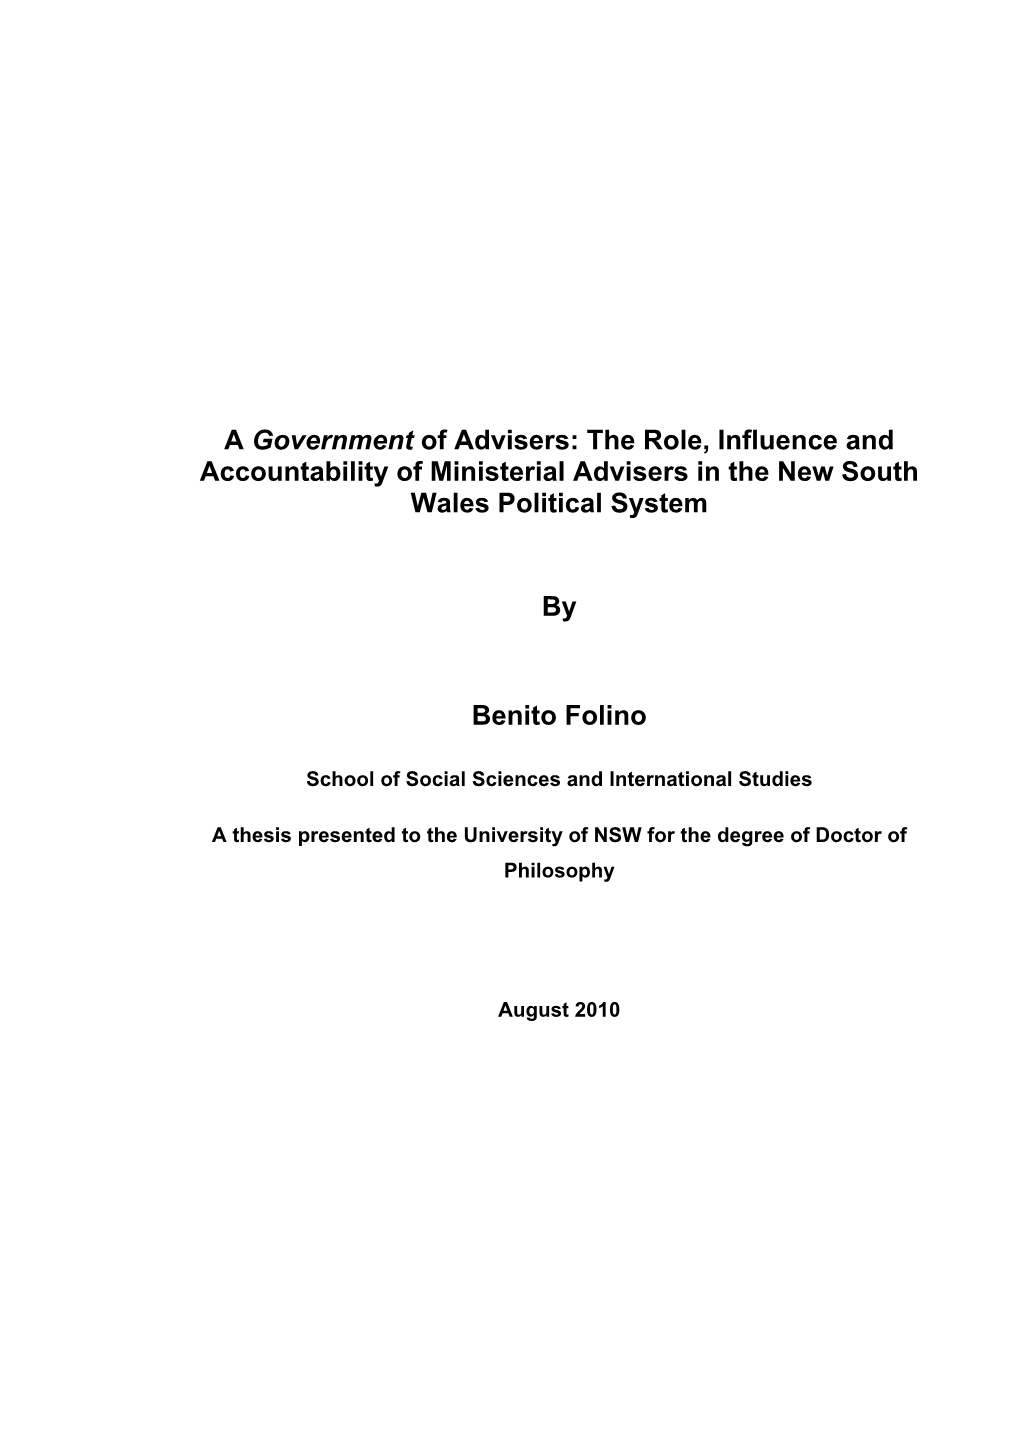 A Government of Advisers: the Role, Influence and Accountability of Ministerial Advisers in the New South Wales Political System